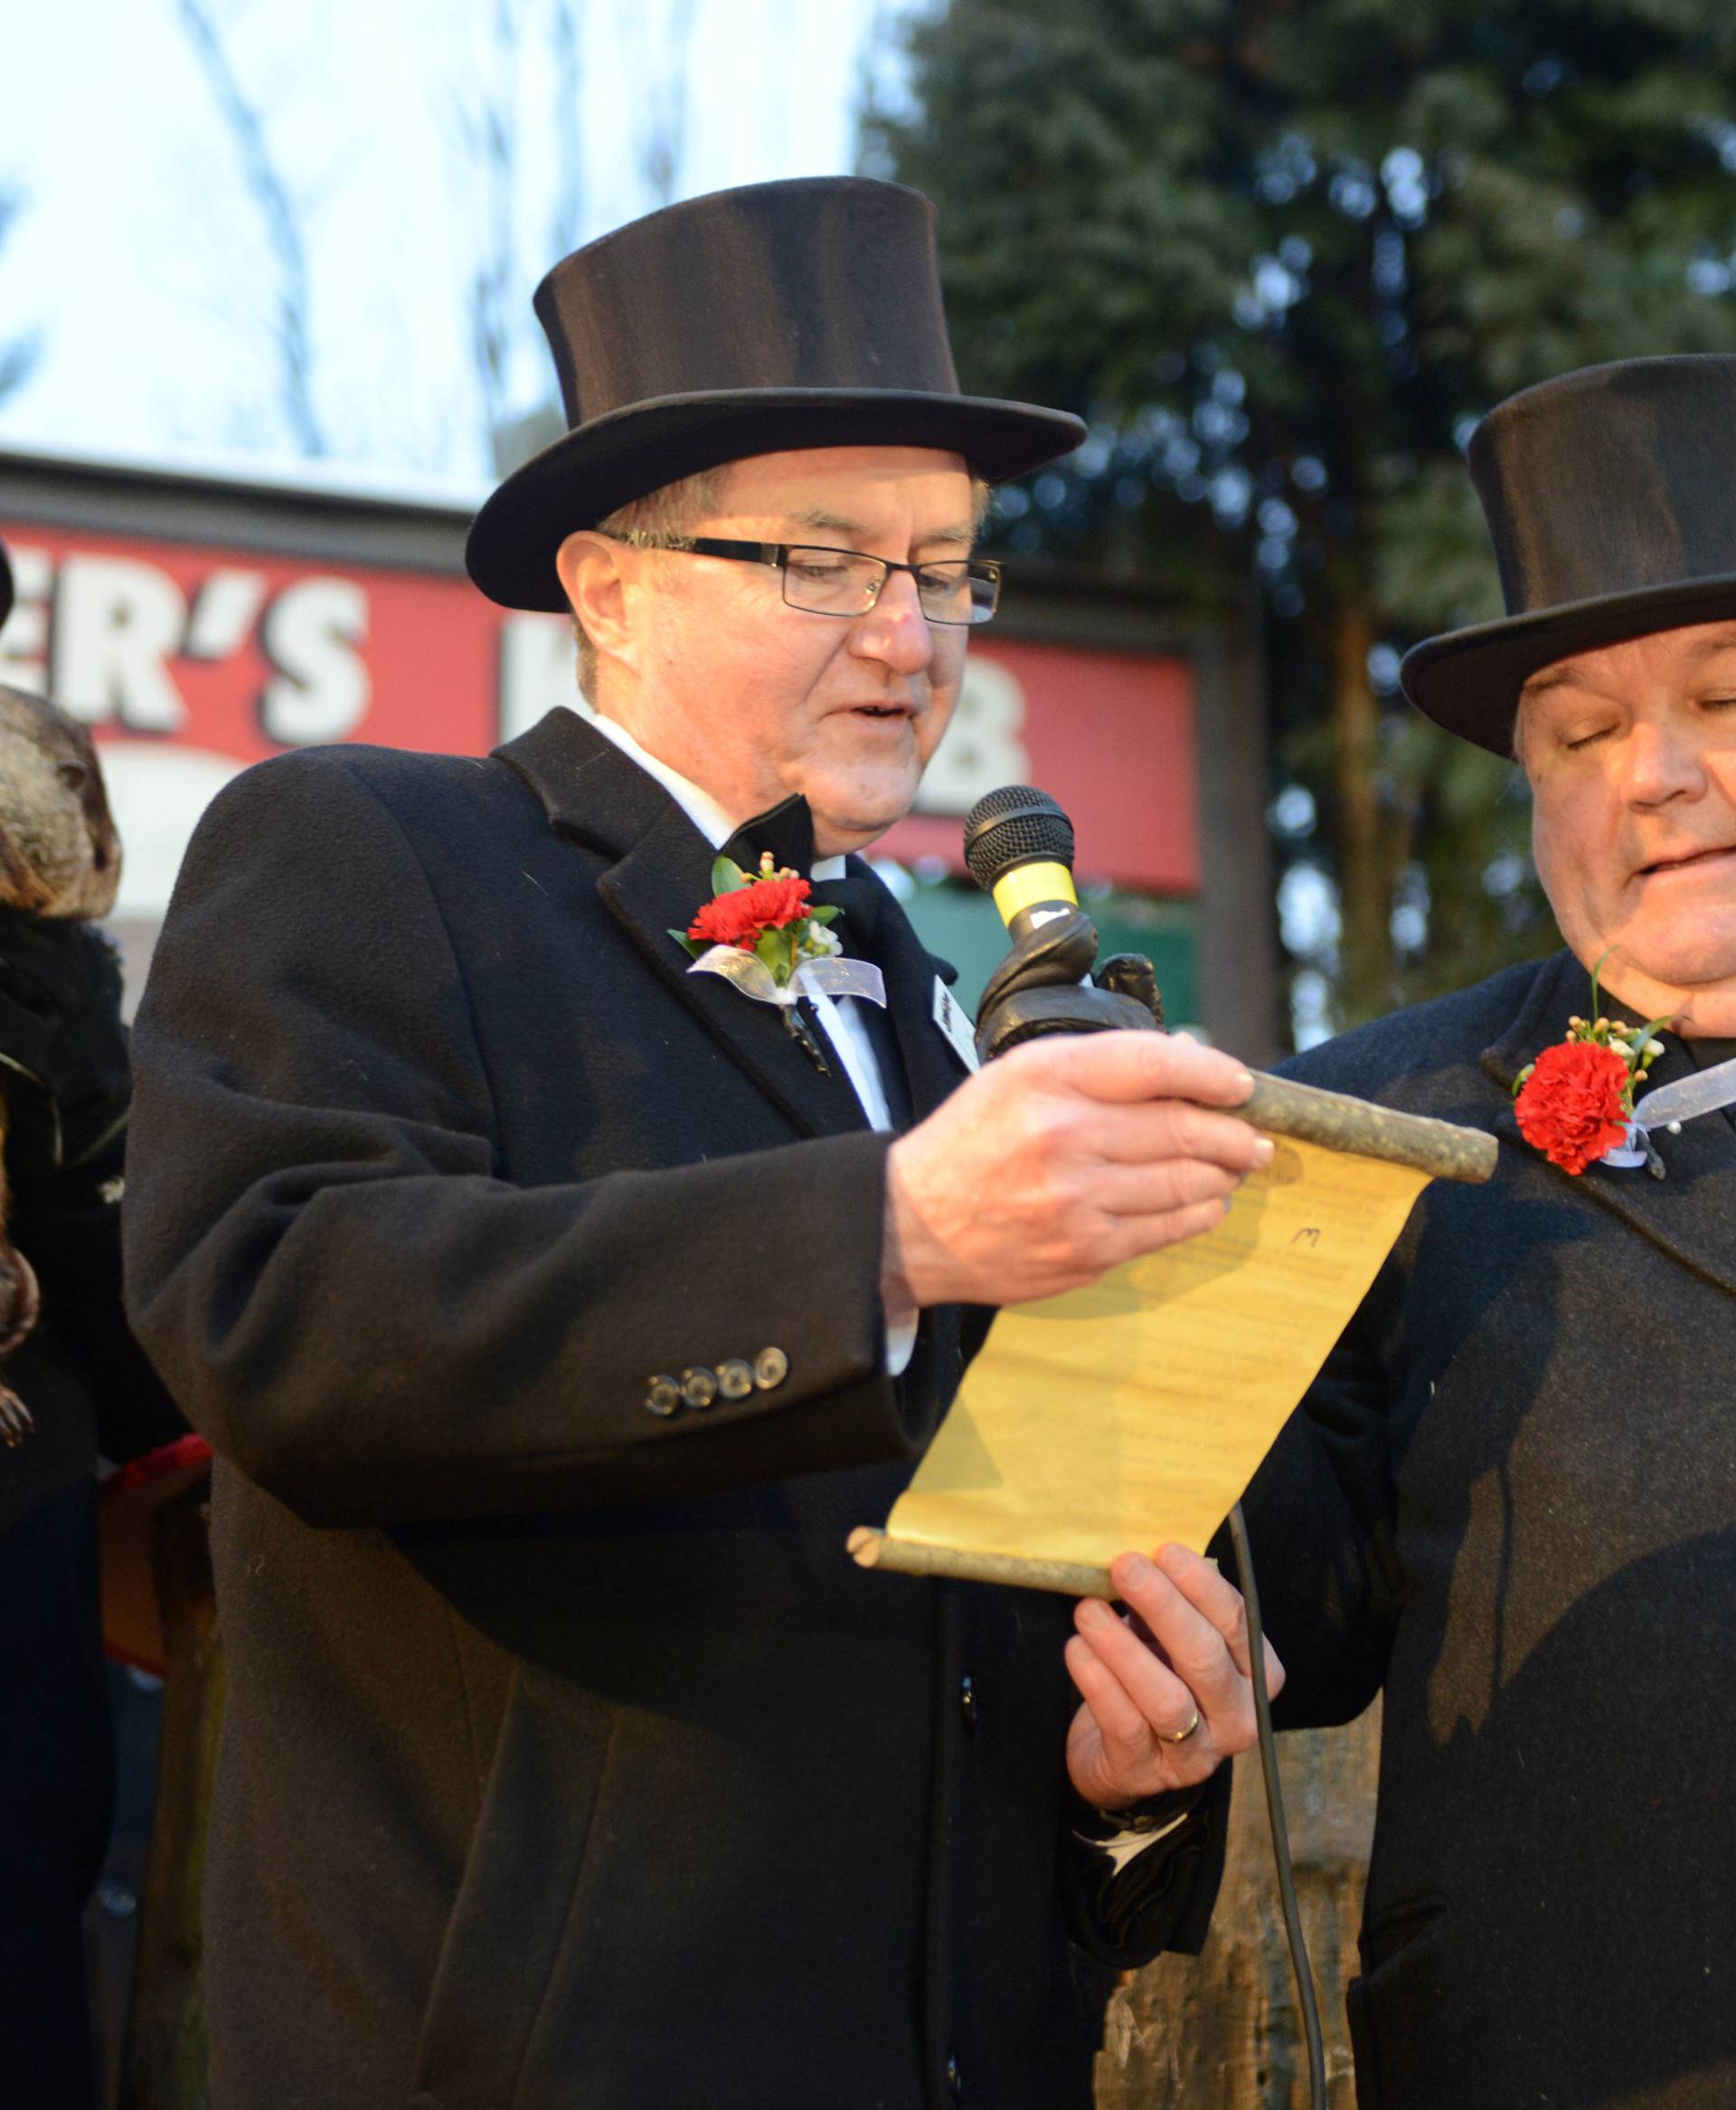 Inner Circle member Jeff Lundy reads Phil's forecast on Groundhog Day in Punxsutawney